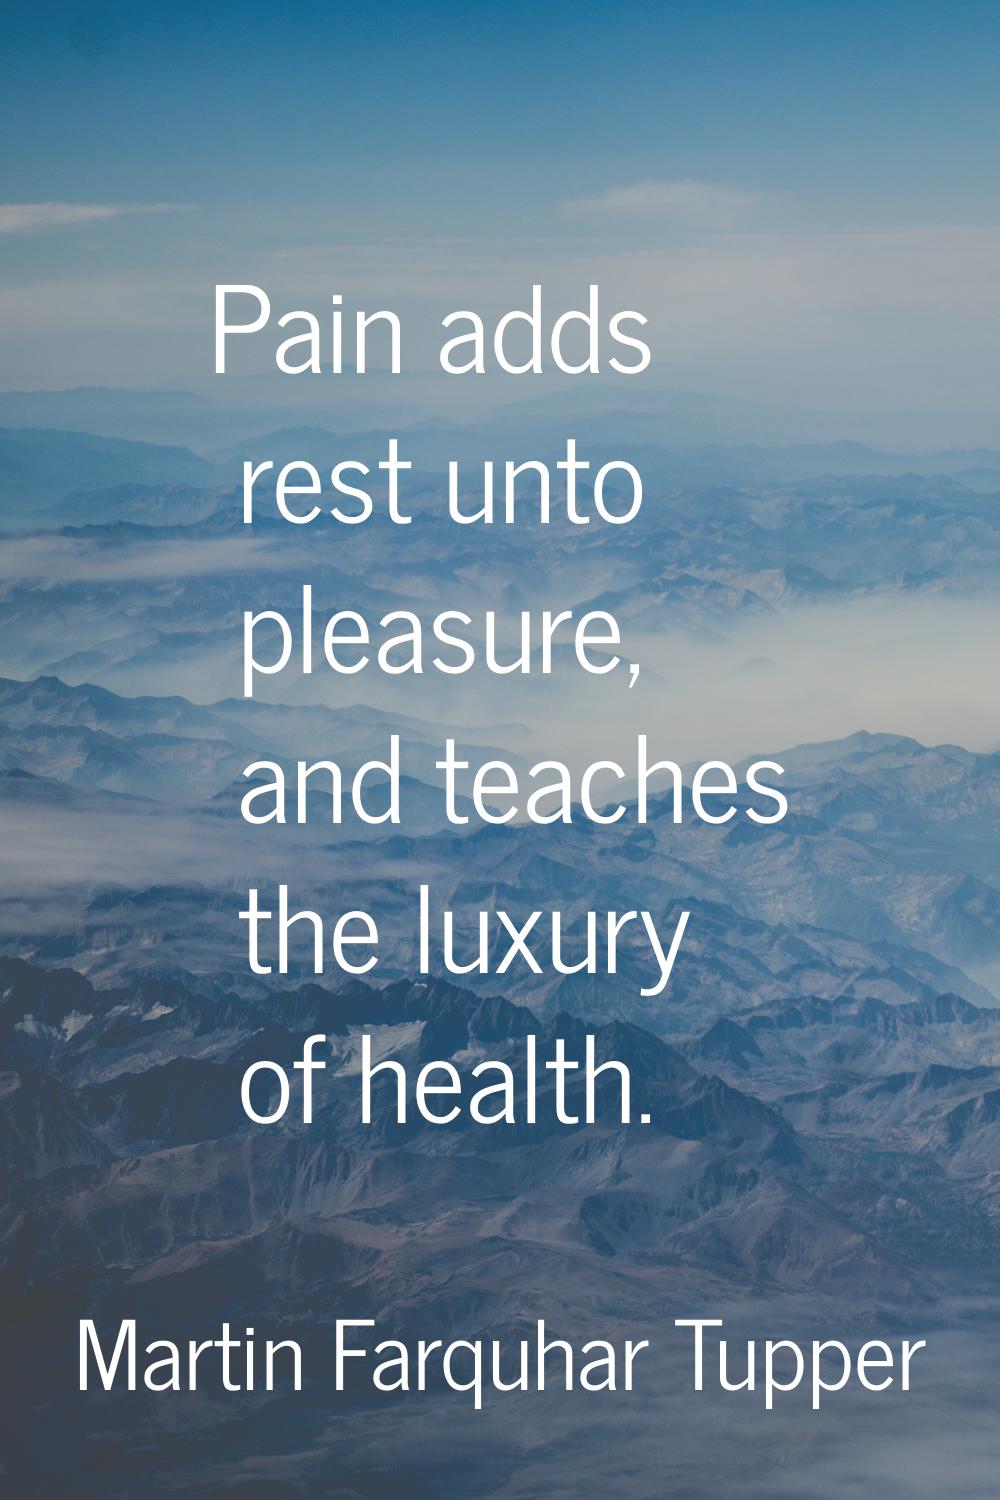 Pain adds rest unto pleasure, and teaches the luxury of health.